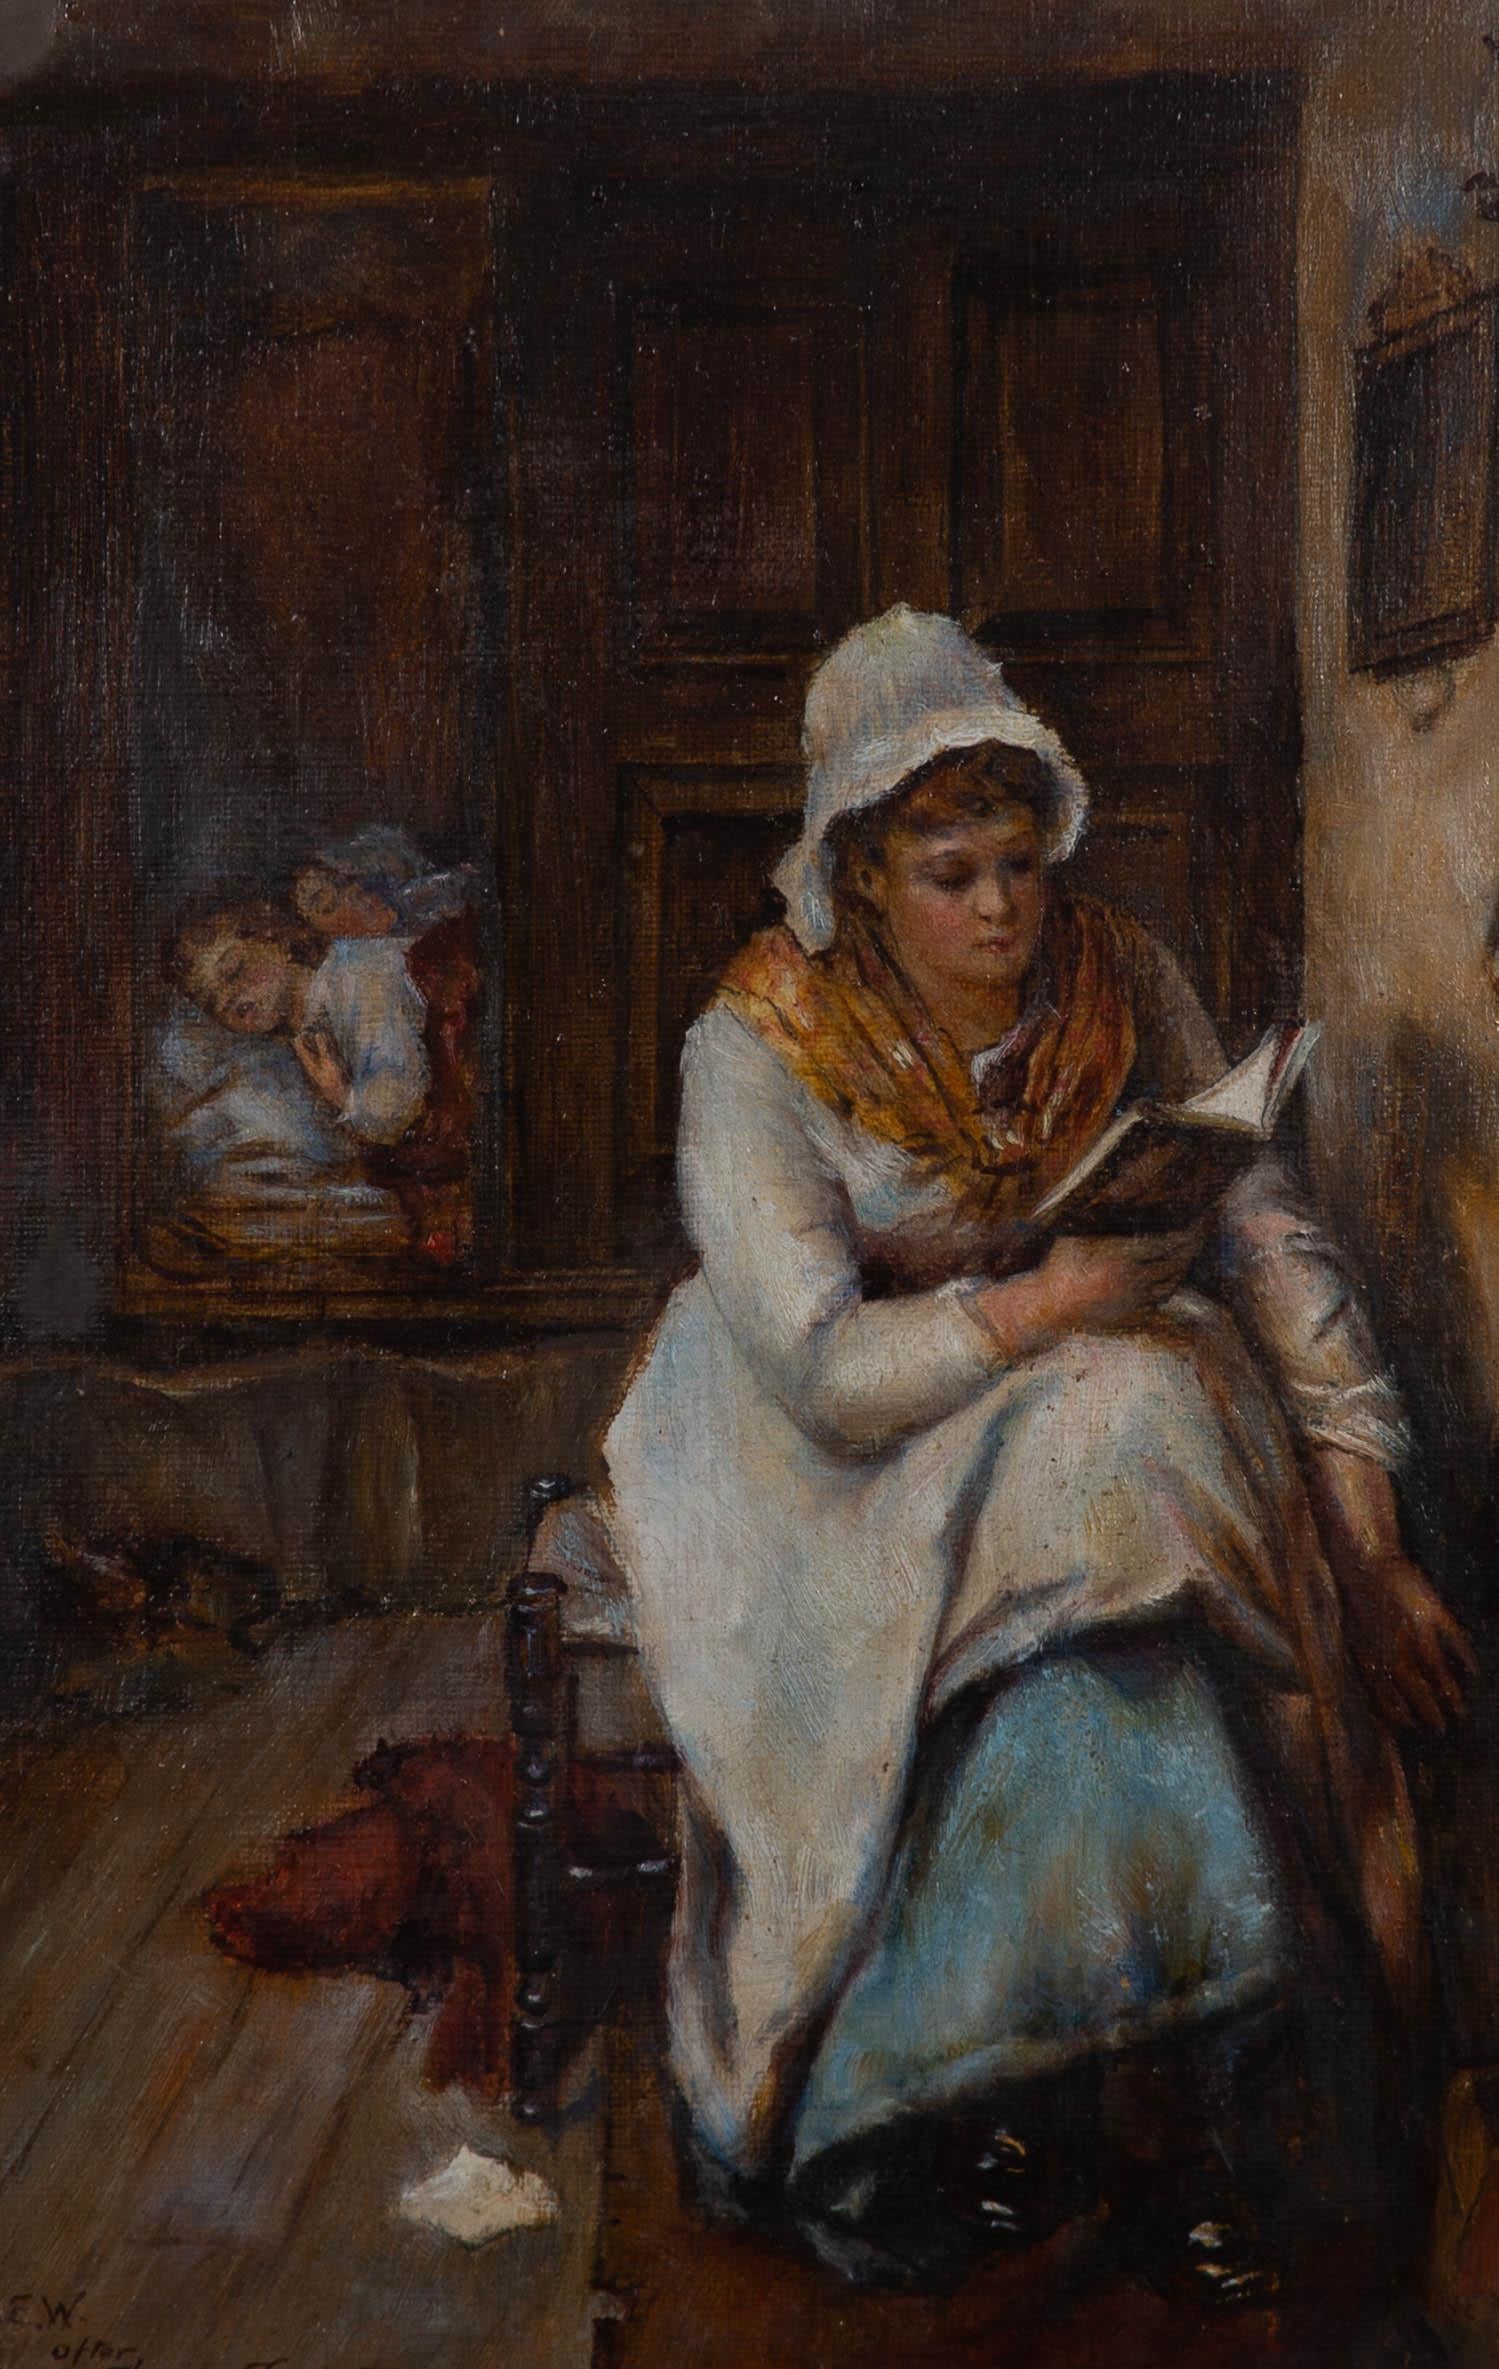 E.E.W. after Thomas Faed RSA (1826-1900) - Oil, When the Children are Asleep 1